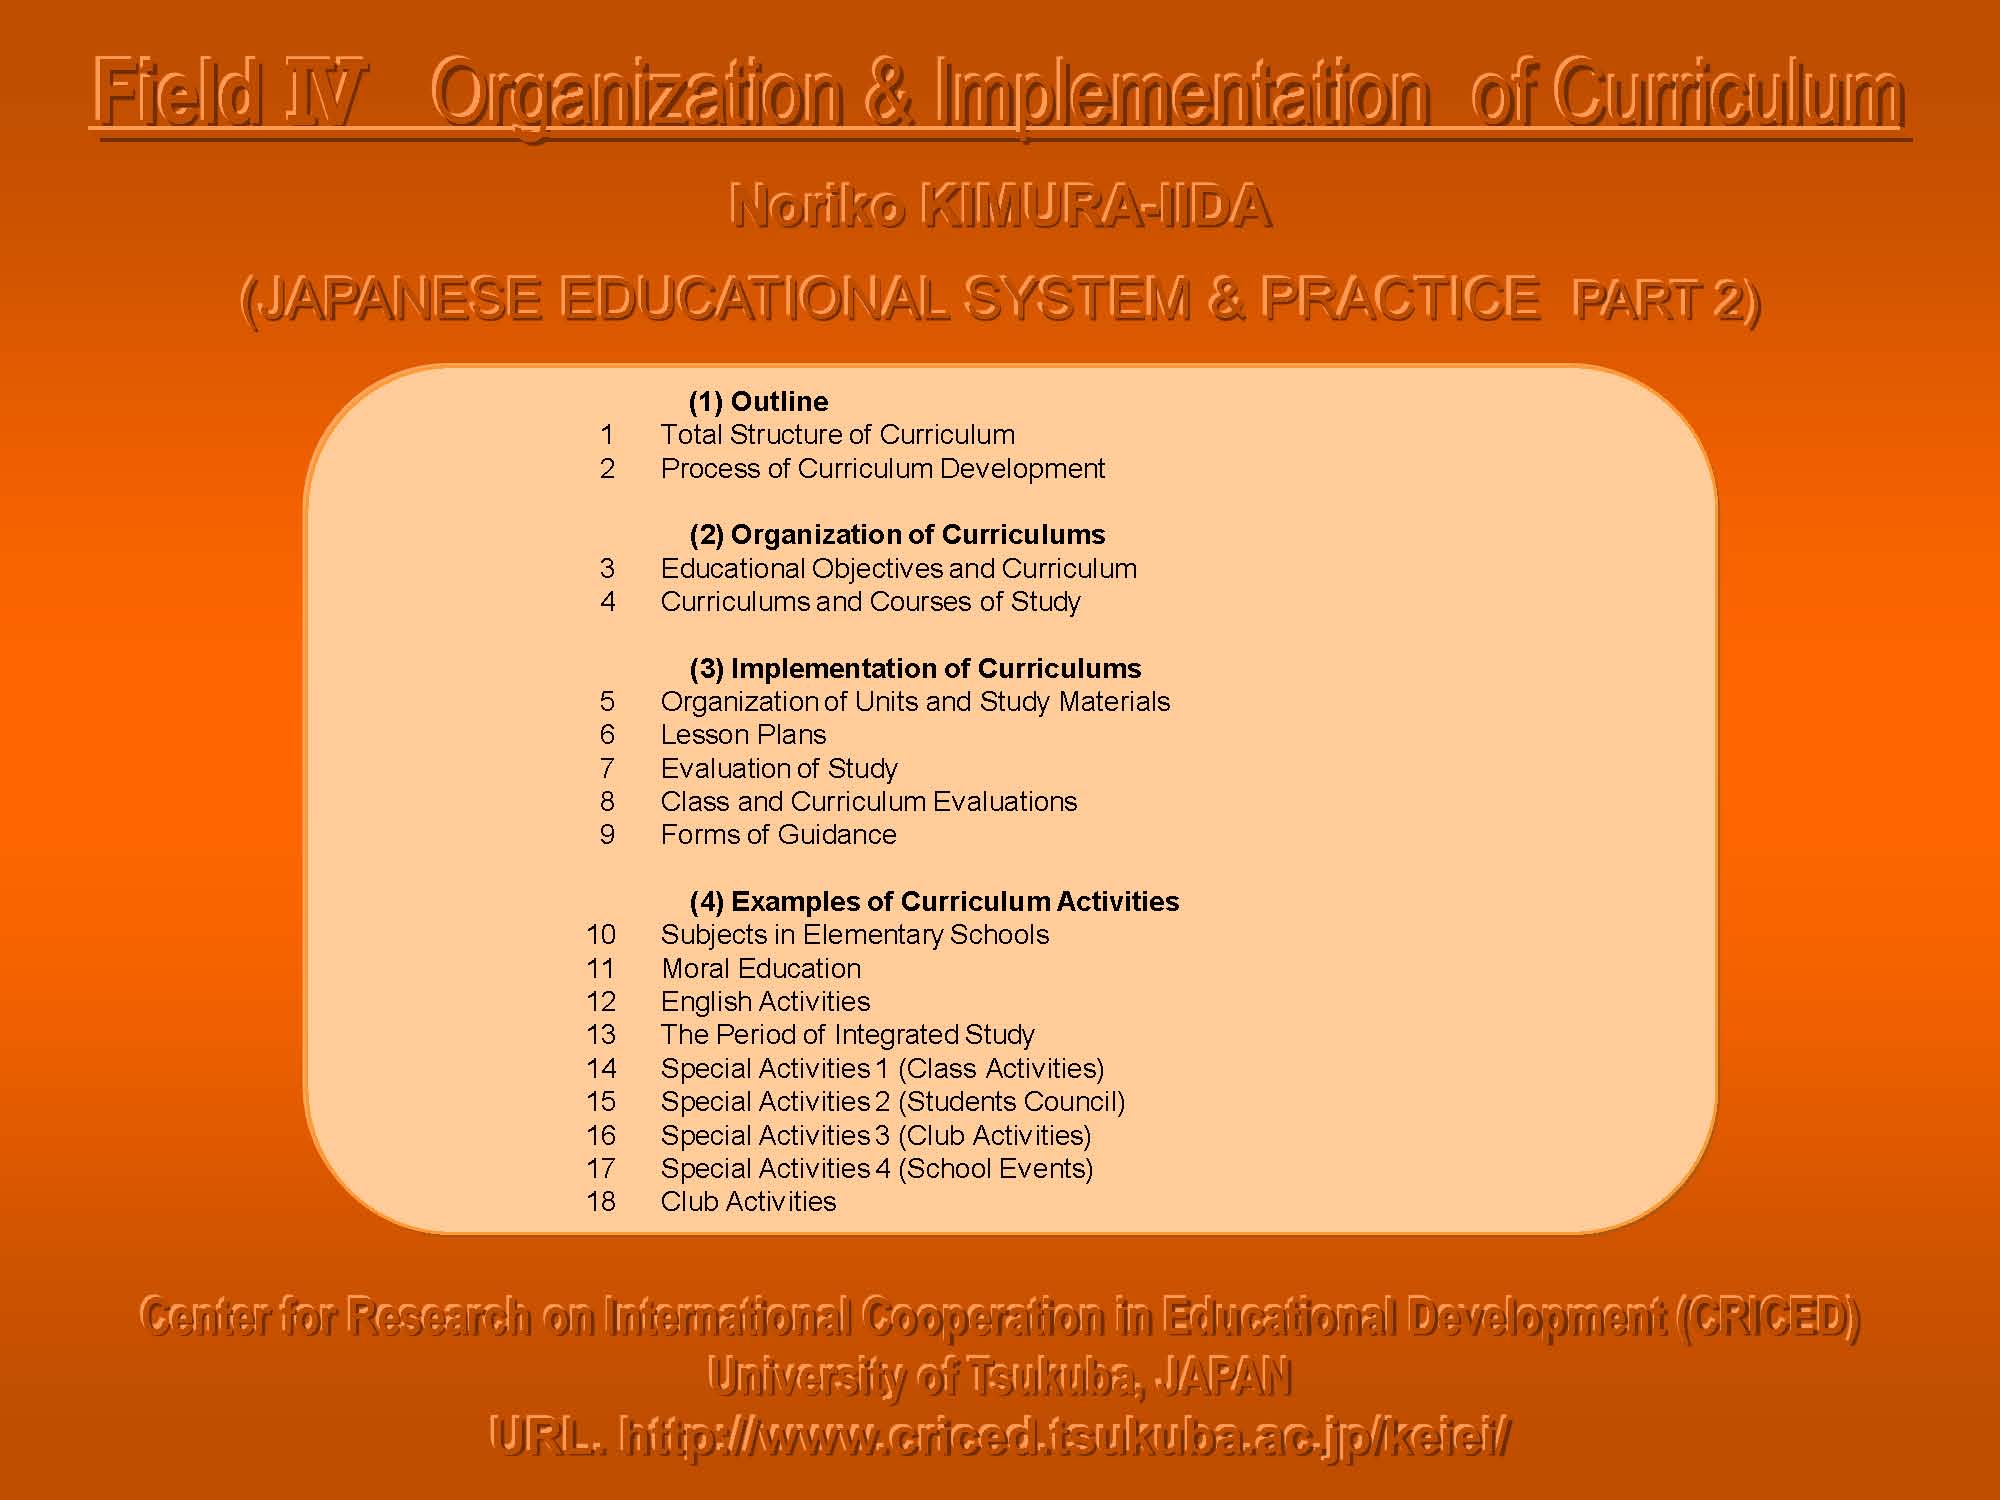 IV Organization and Implementation of Curriclum